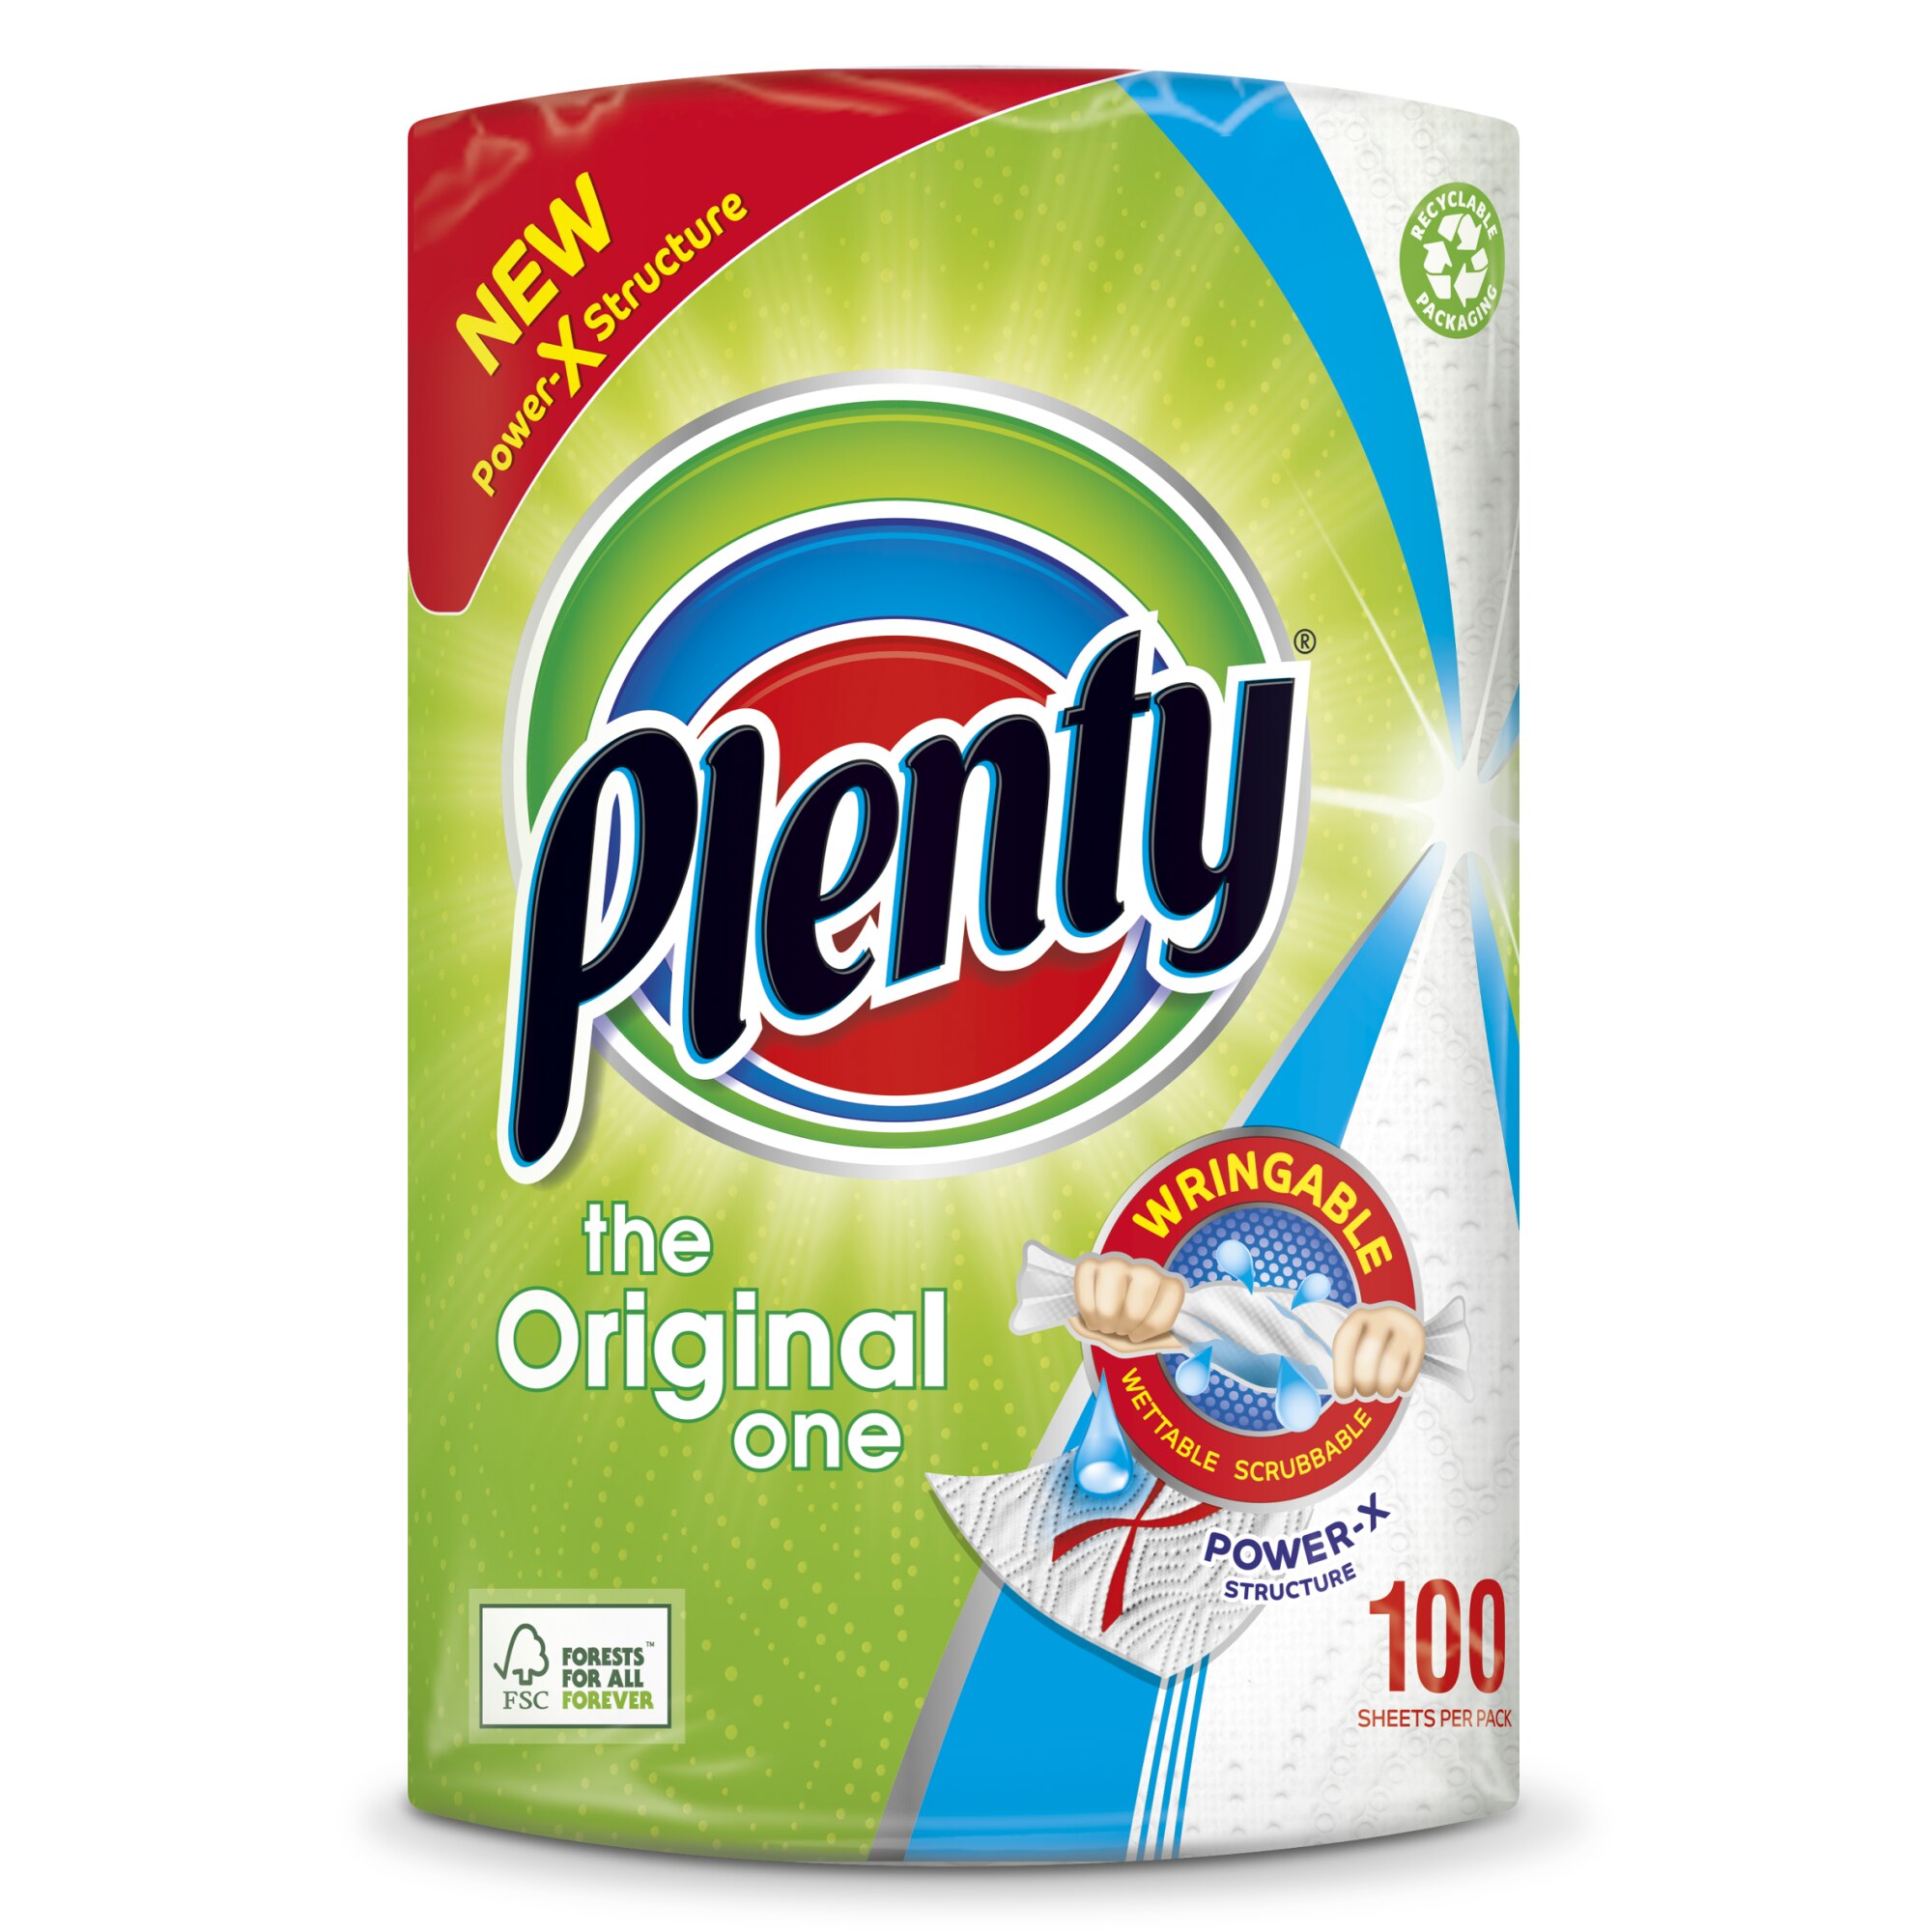 8 x Plenty Kitchen RollThe Original One100 2 ply Sheets Paper Towels 